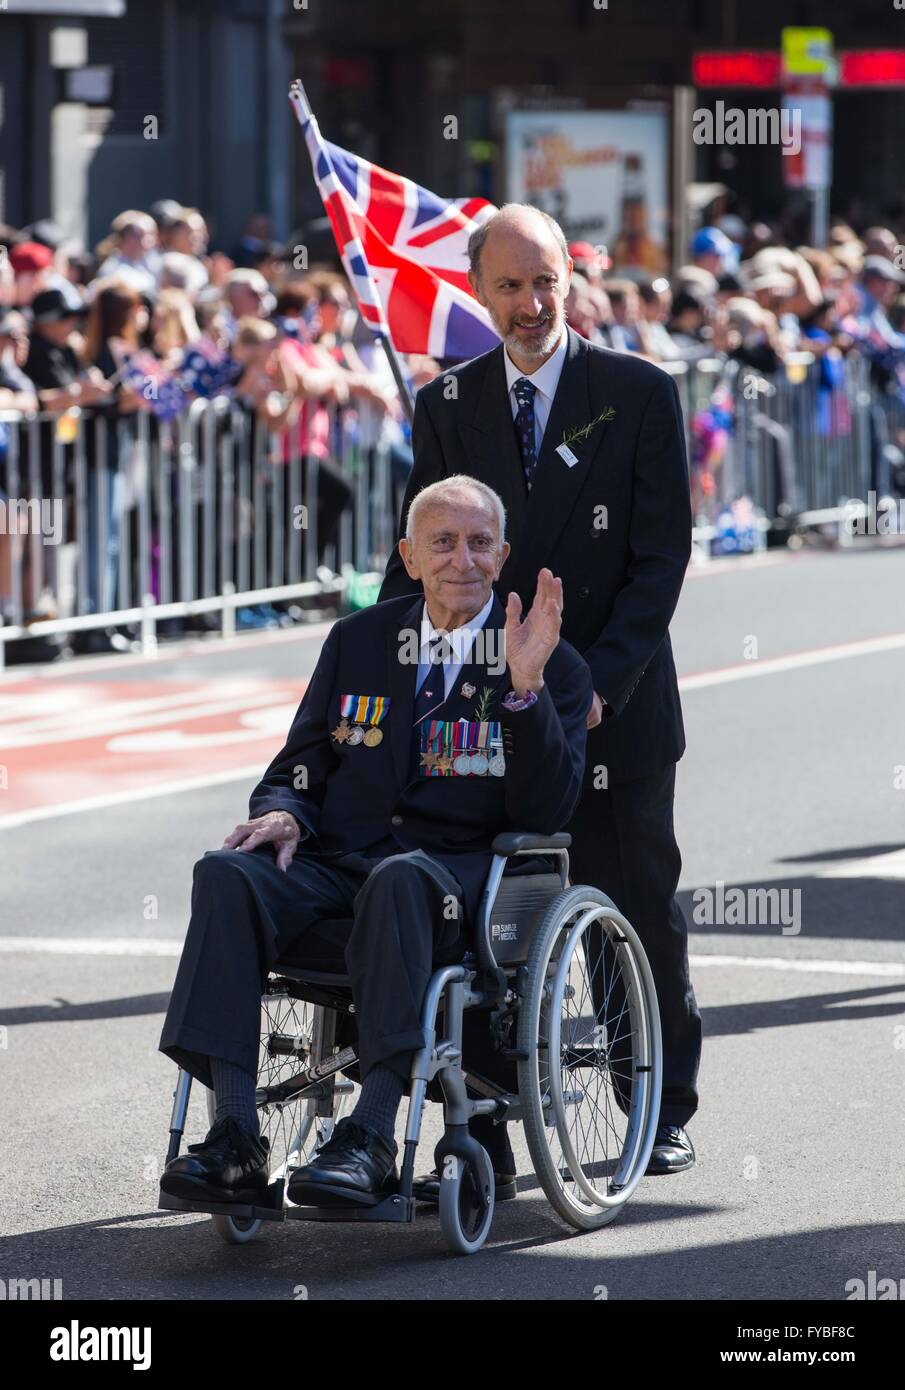 Sydney, Australia. 25th Apr, 2016. A veteran waves his hand to the crowd during the ANZAC Day Parade in Sydney, Australia, April 25, 2016. ANZAC Day is a national day of remembrance in Australia and New Zealand originally to honor the members of the Australian and New Zealand Army Corps (ANZAC) who fought at Gallipoli during World War I but now more to commemorate all those who served and died in military operations for their countries. Credit:  Zhu Hongye/Xinhua/Alamy Live News Stock Photo